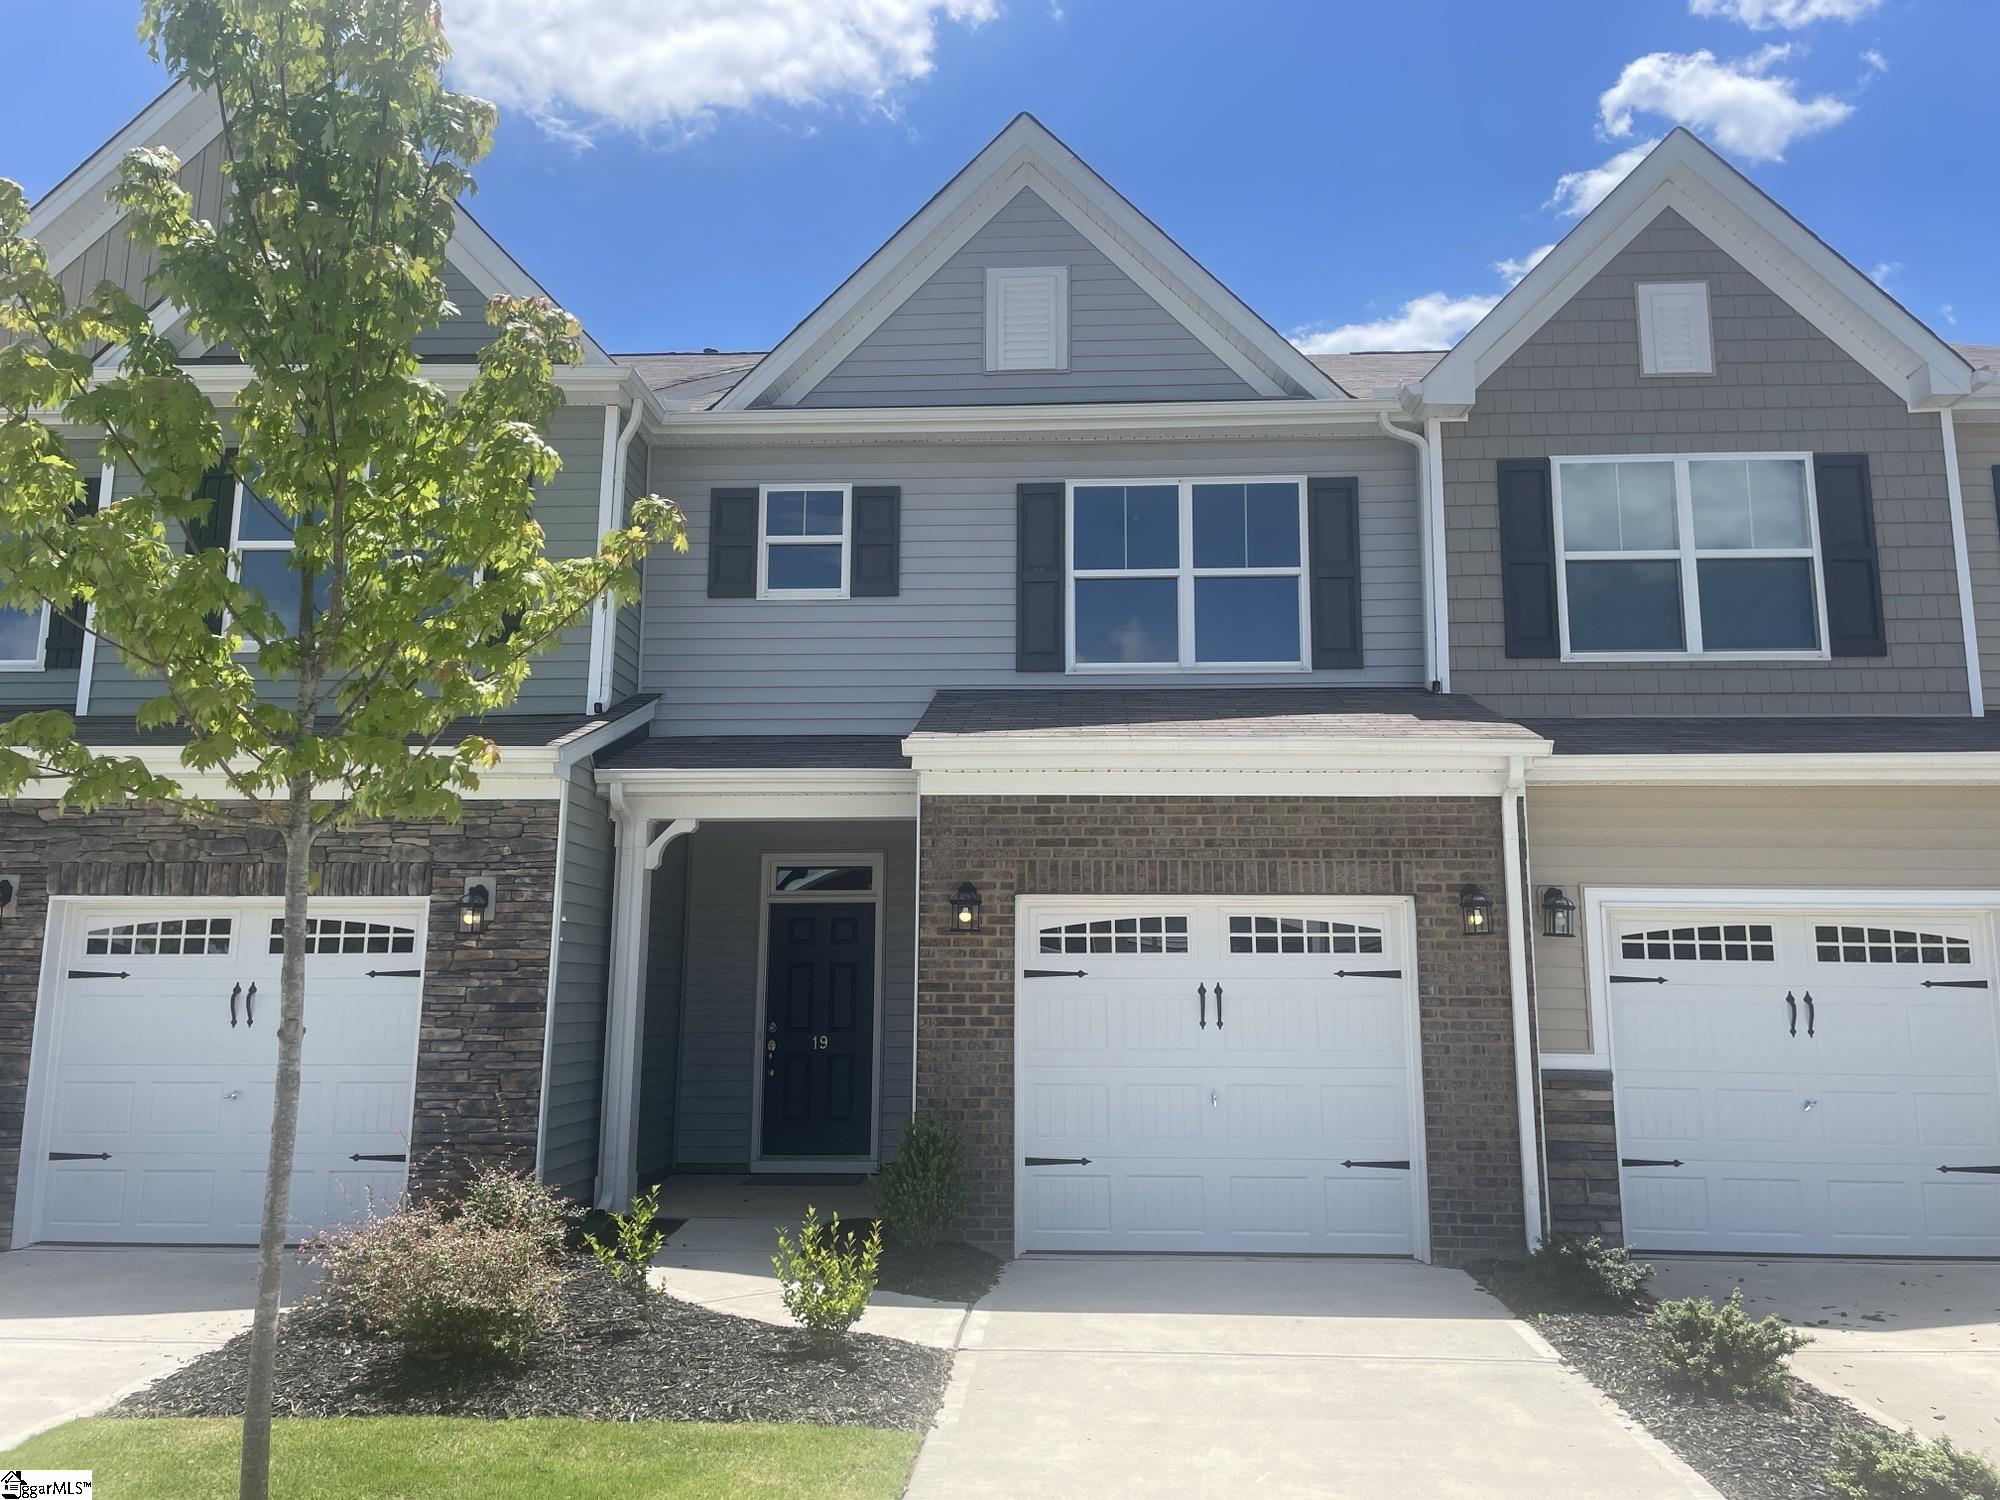 View Simpsonville, SC 29680 townhome